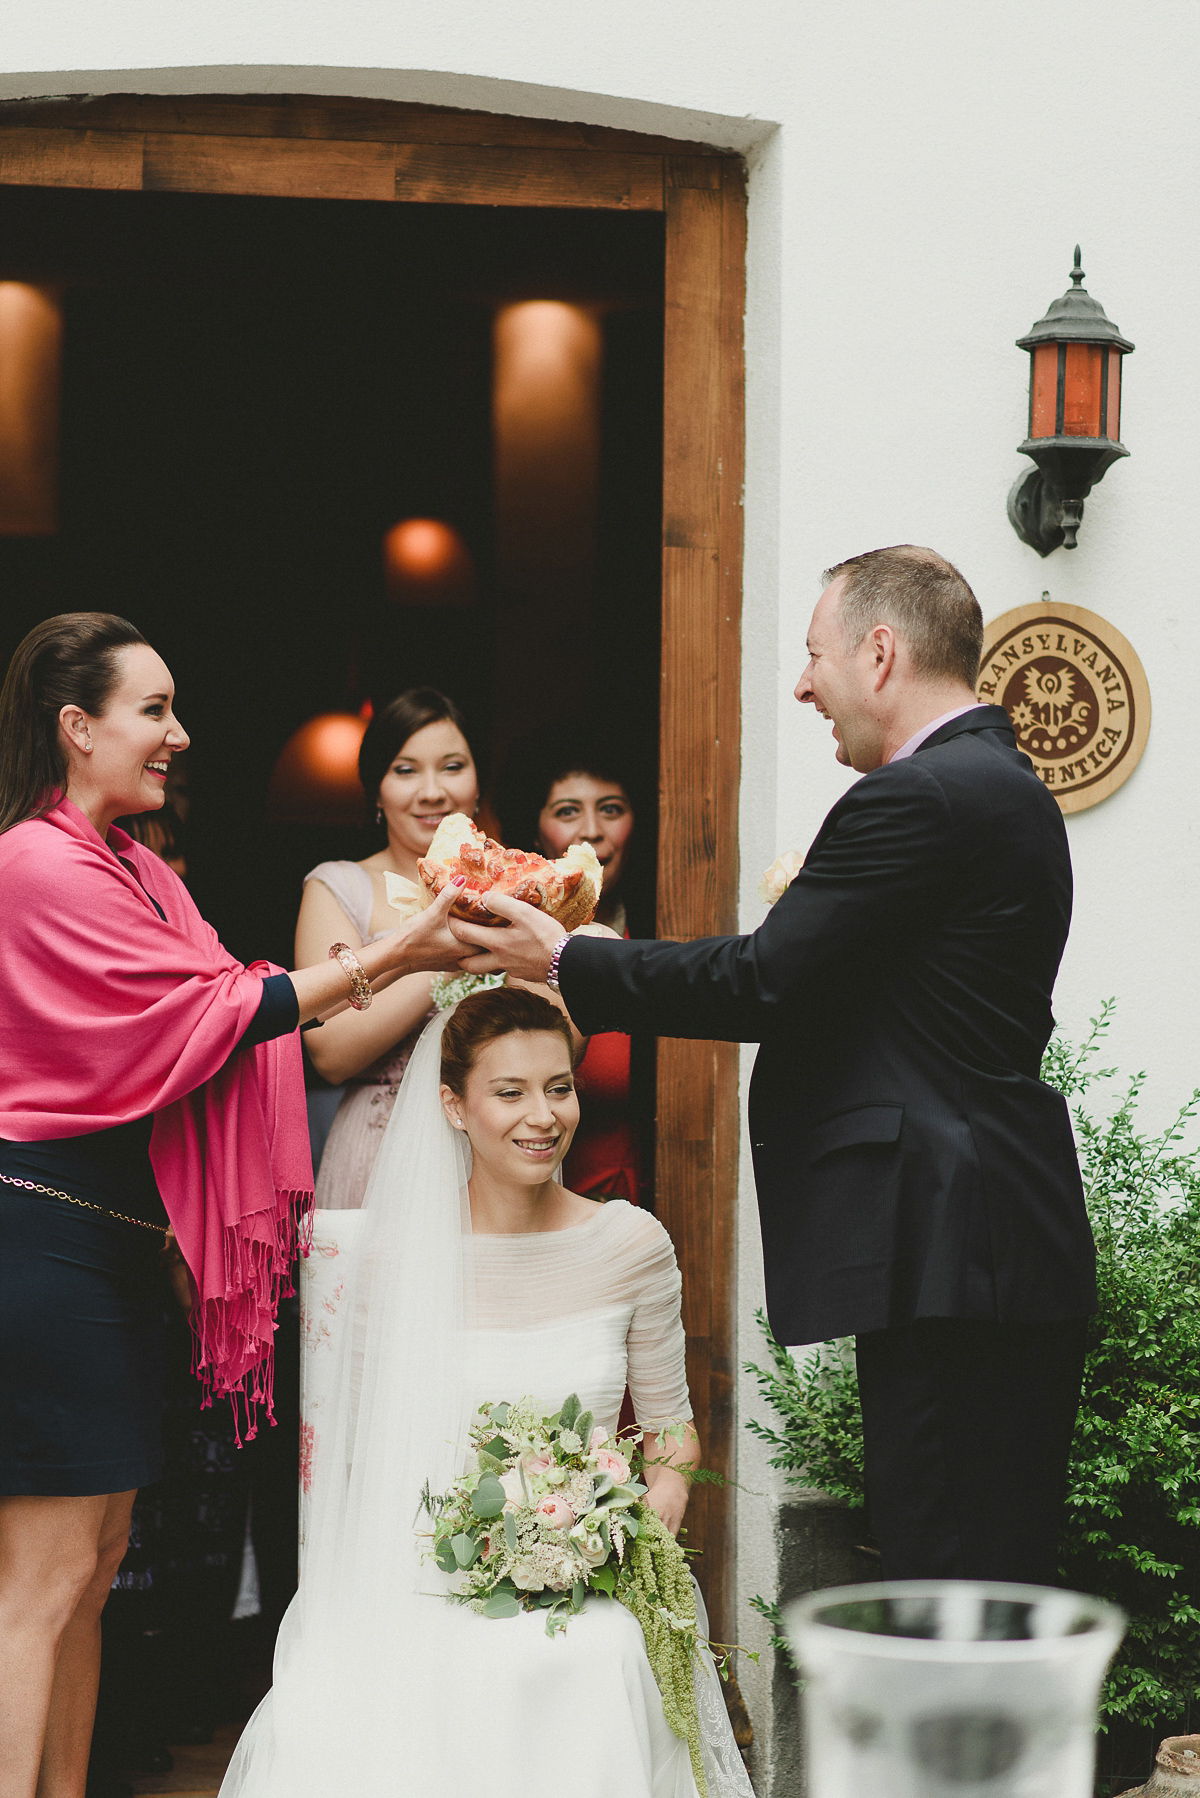 Roxana wore a Pronovias gown for her intimate summer wedding in Romania.